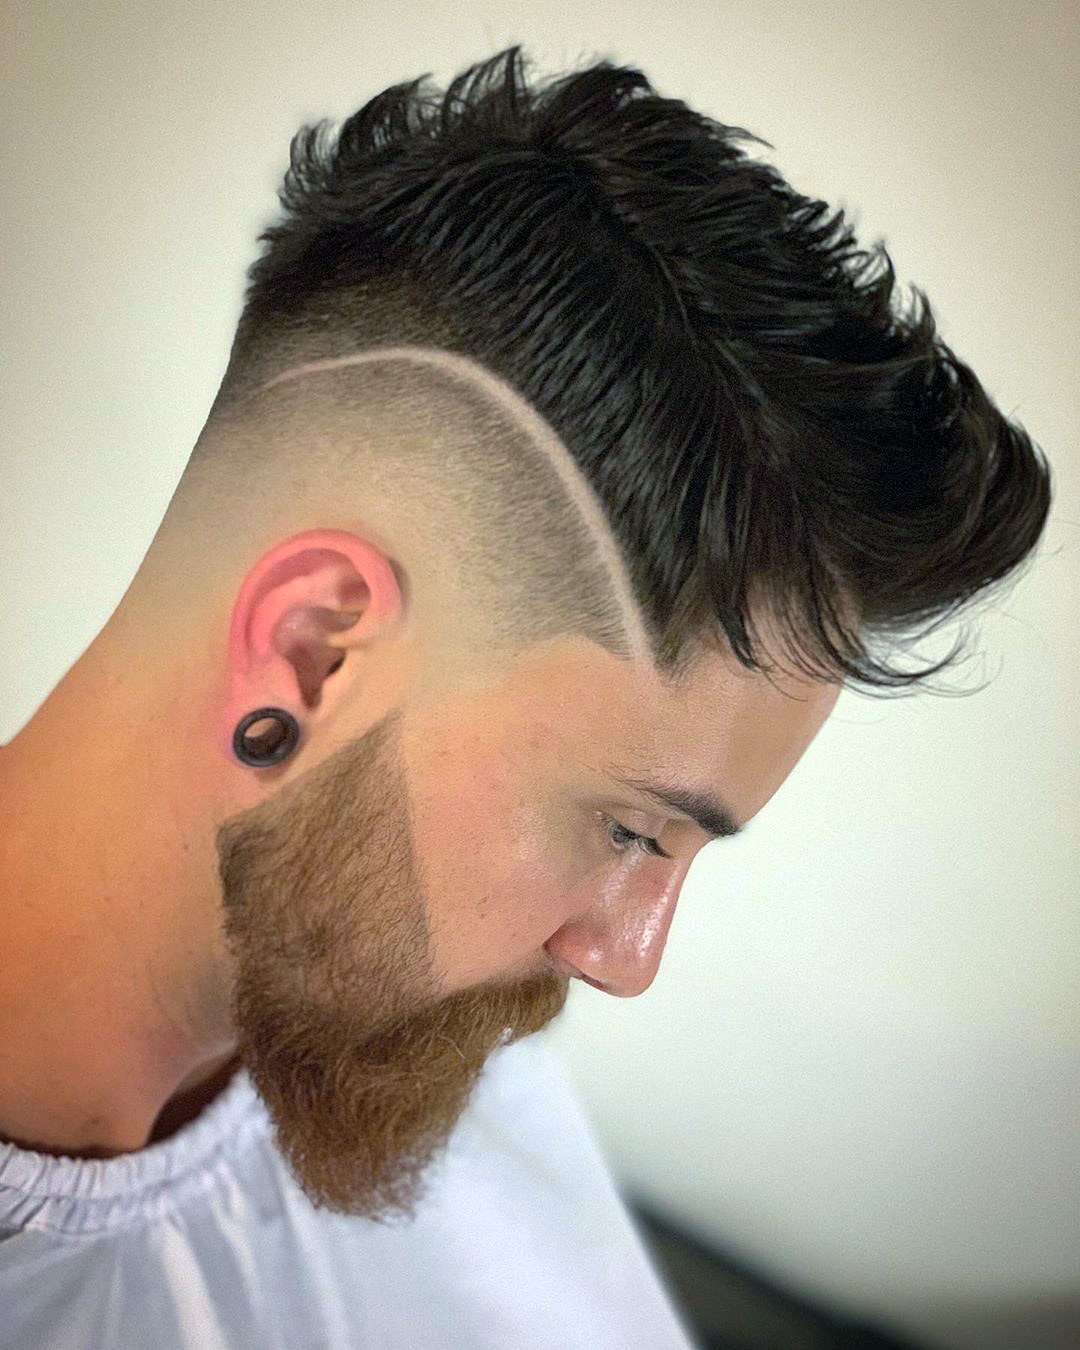 100 Trending Haircuts For Men Haircuts For 2021 Looking for latest hairstyles ideas and best hair color trends 2021? 100 trending haircuts for men haircuts